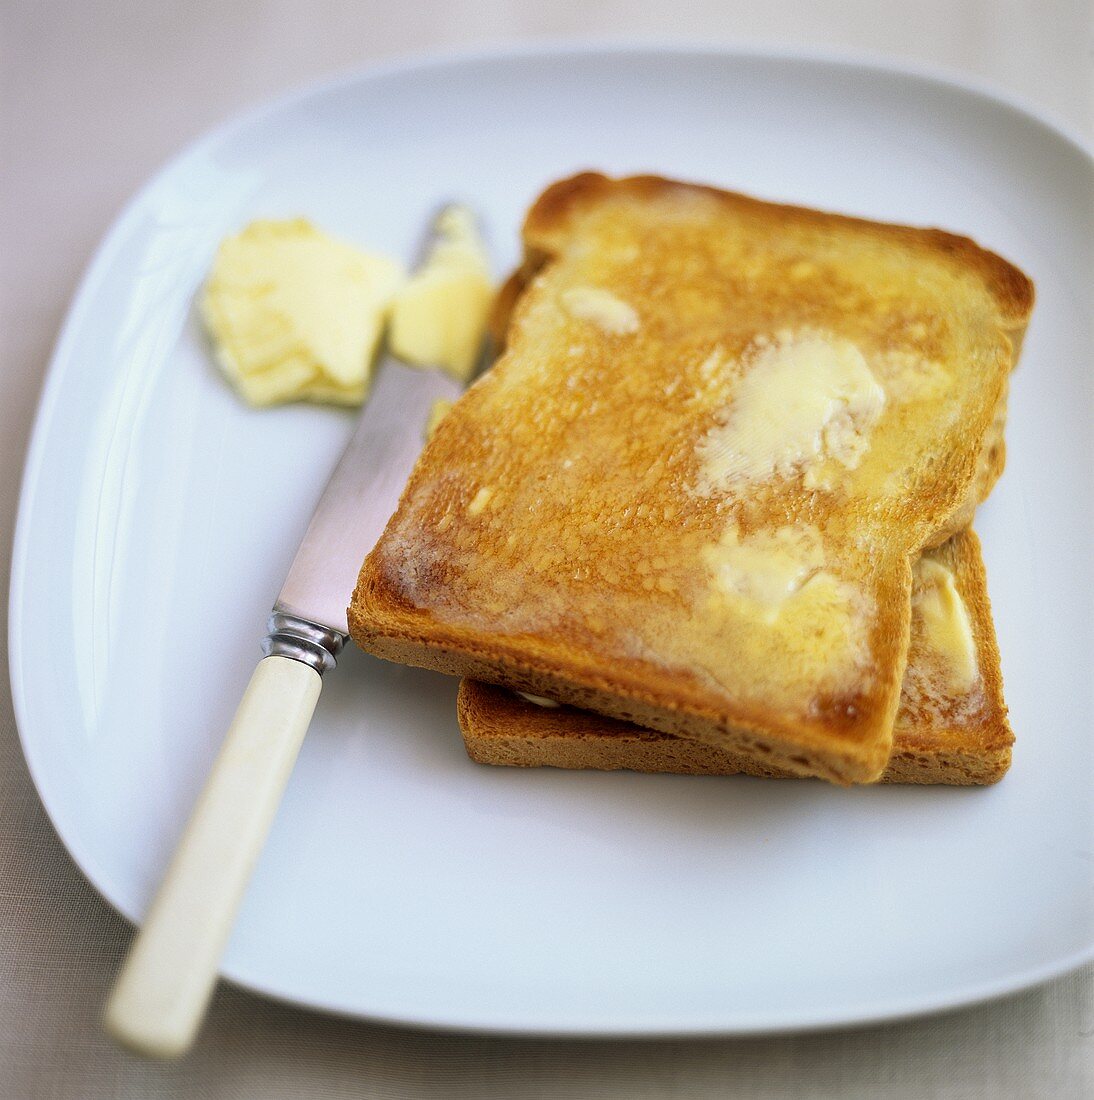 Slices of buttered toast